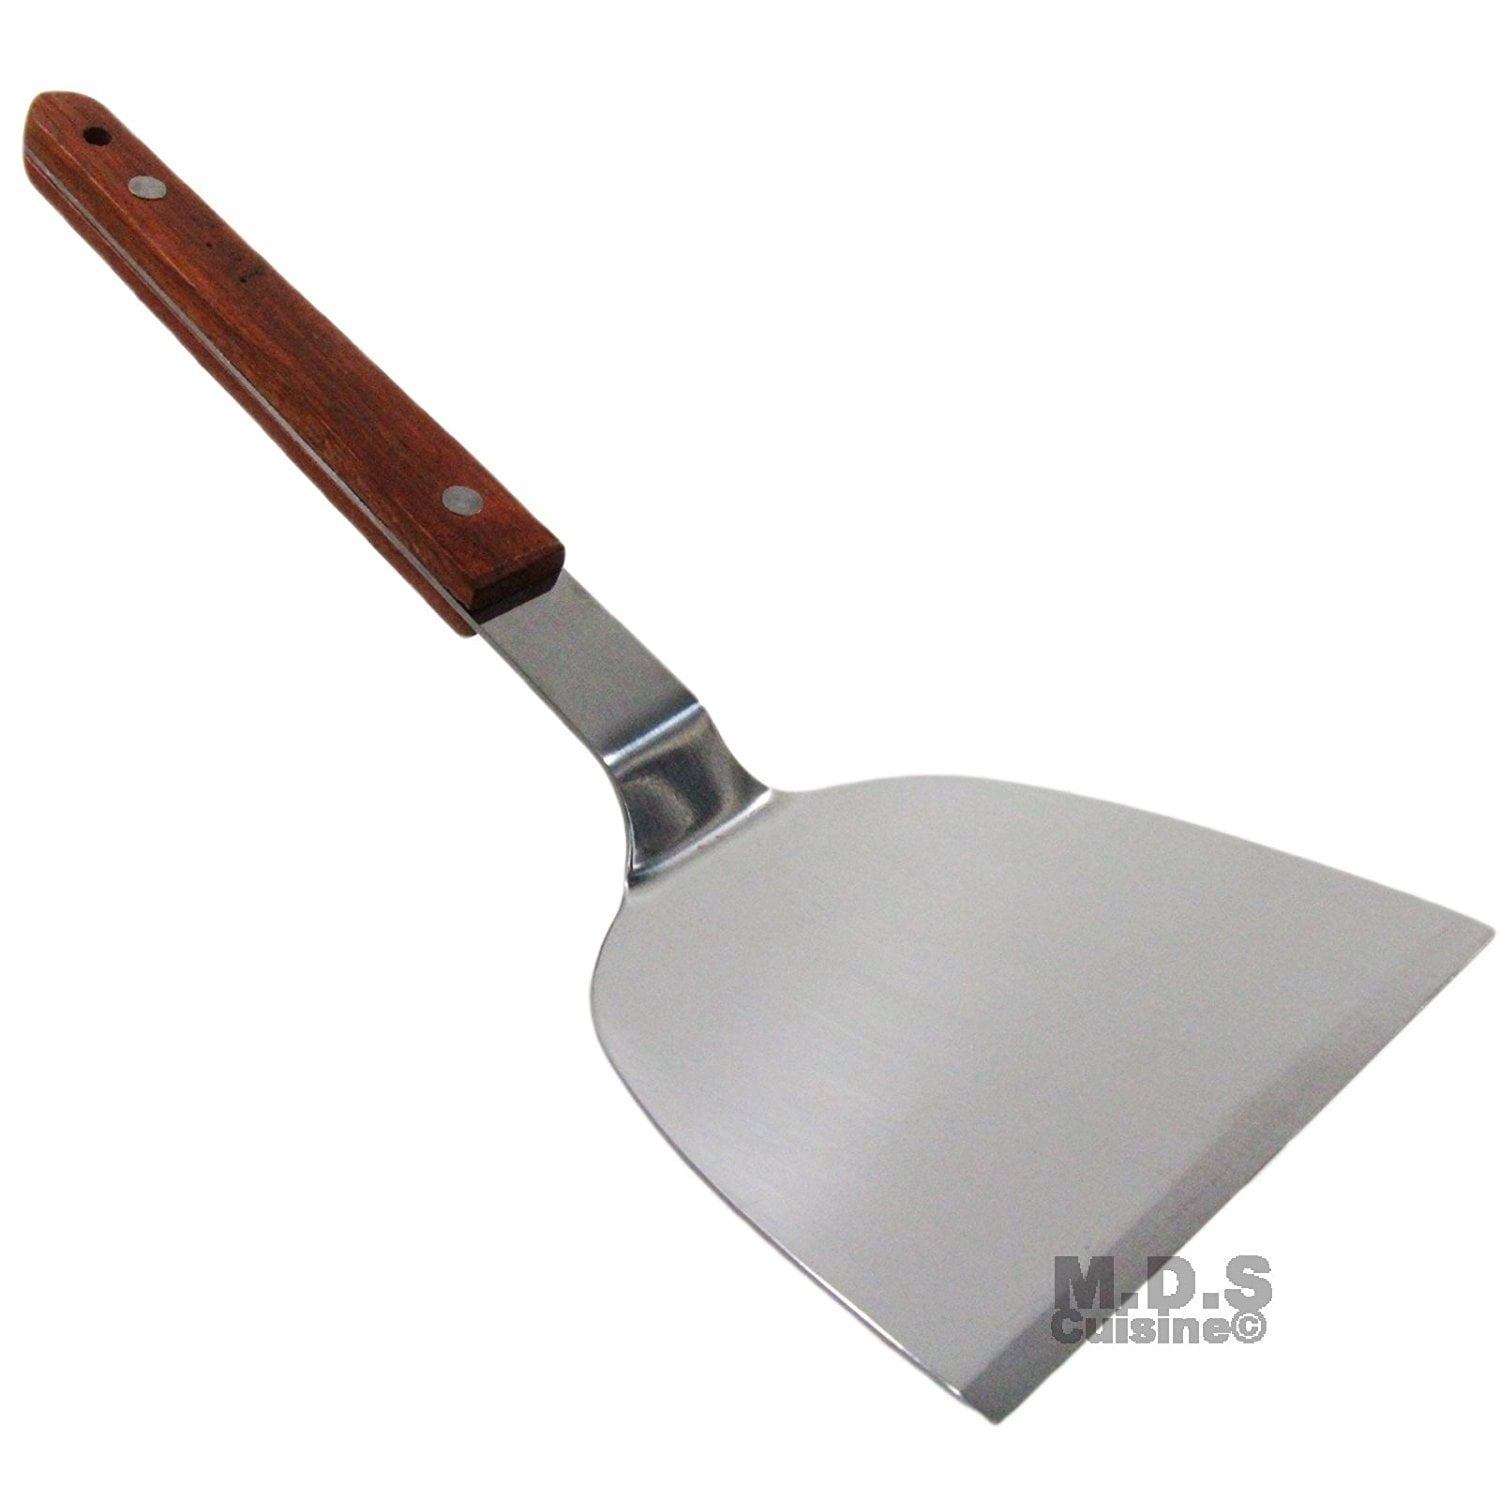 2x 14" Wood Handle Stainless Steel Riveted Restaurant BBQ Grill Spatula Turner 